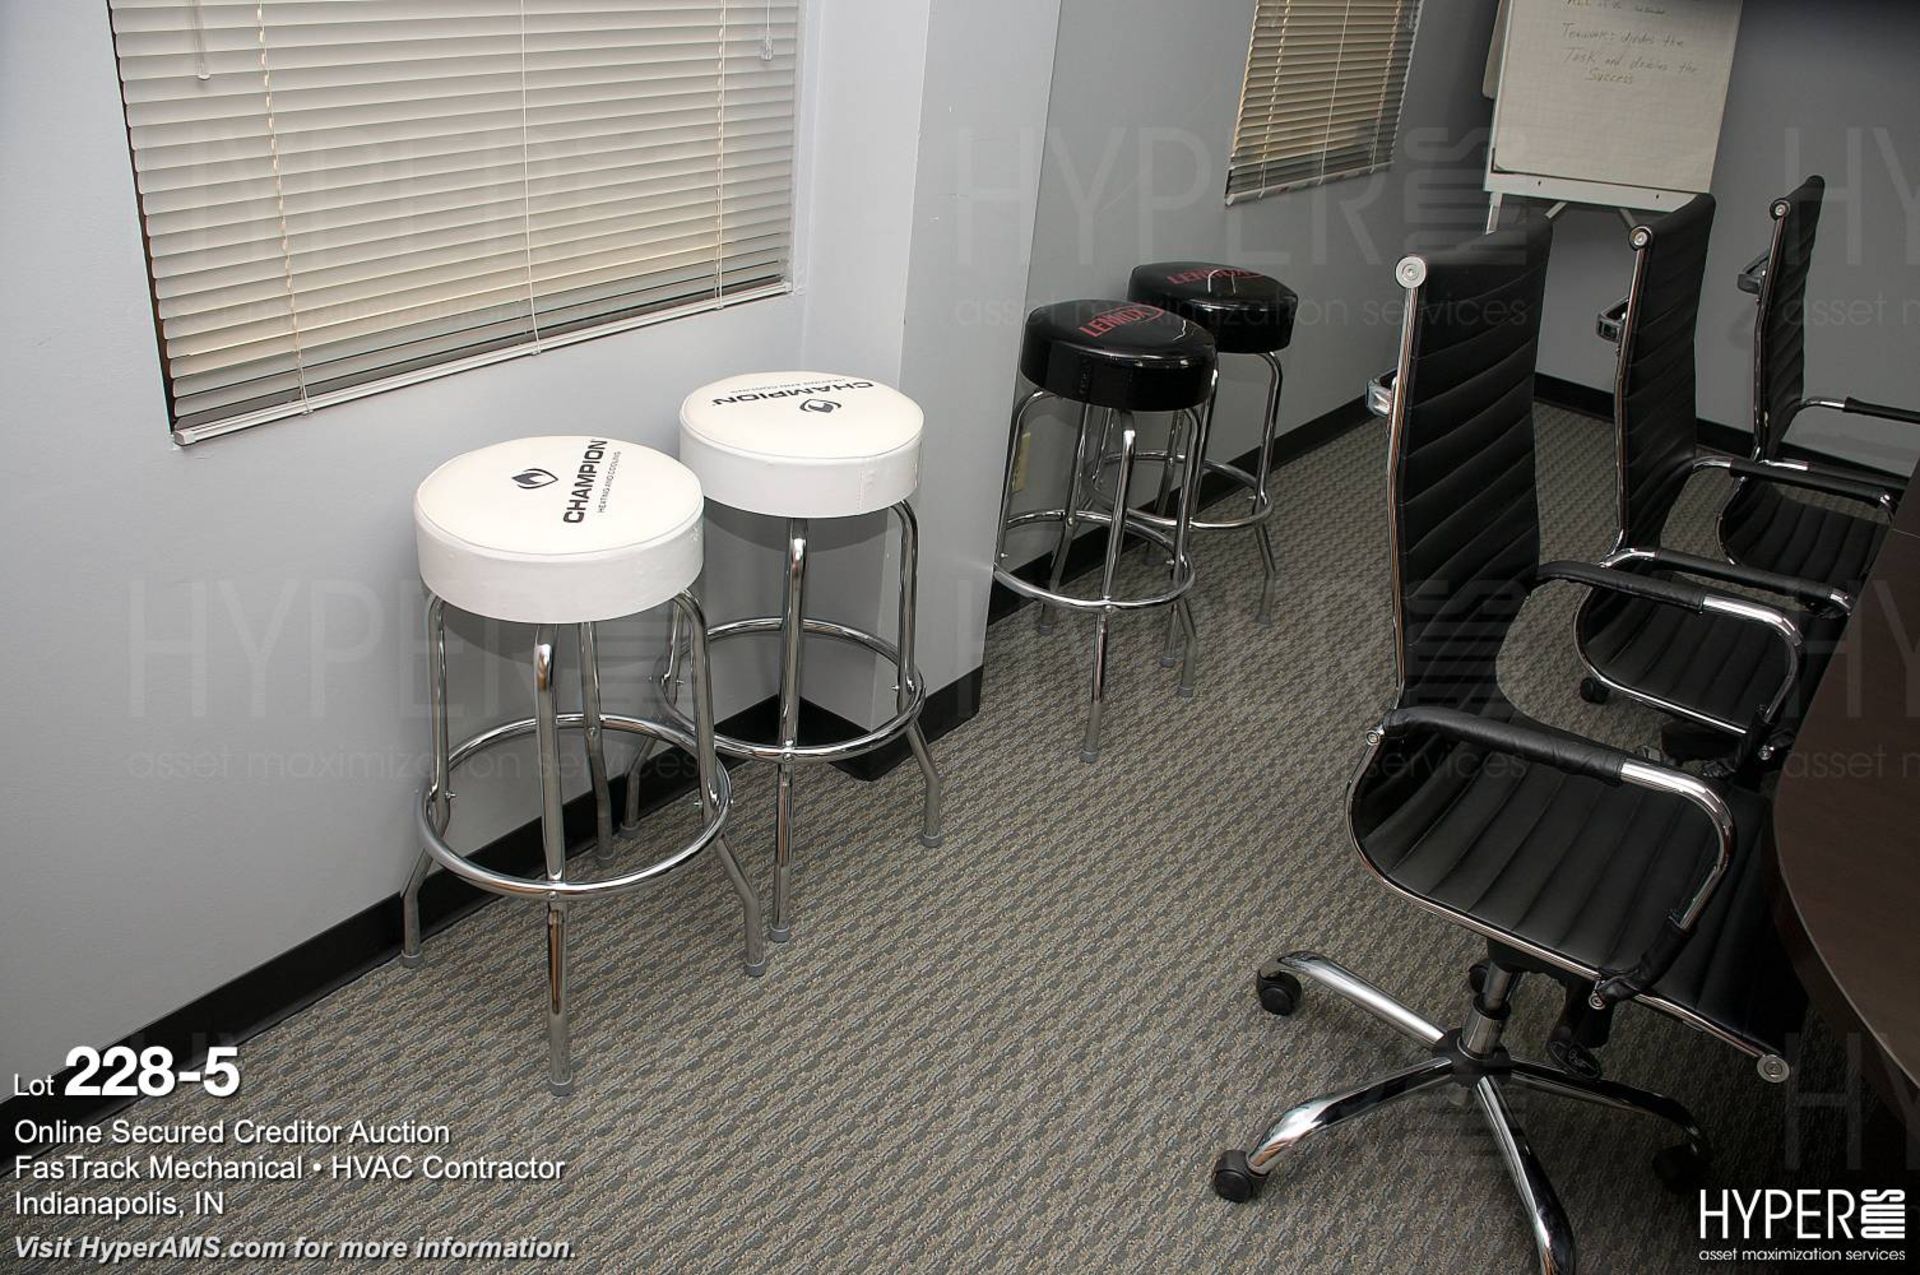 Conference room furniture - Image 2 of 4